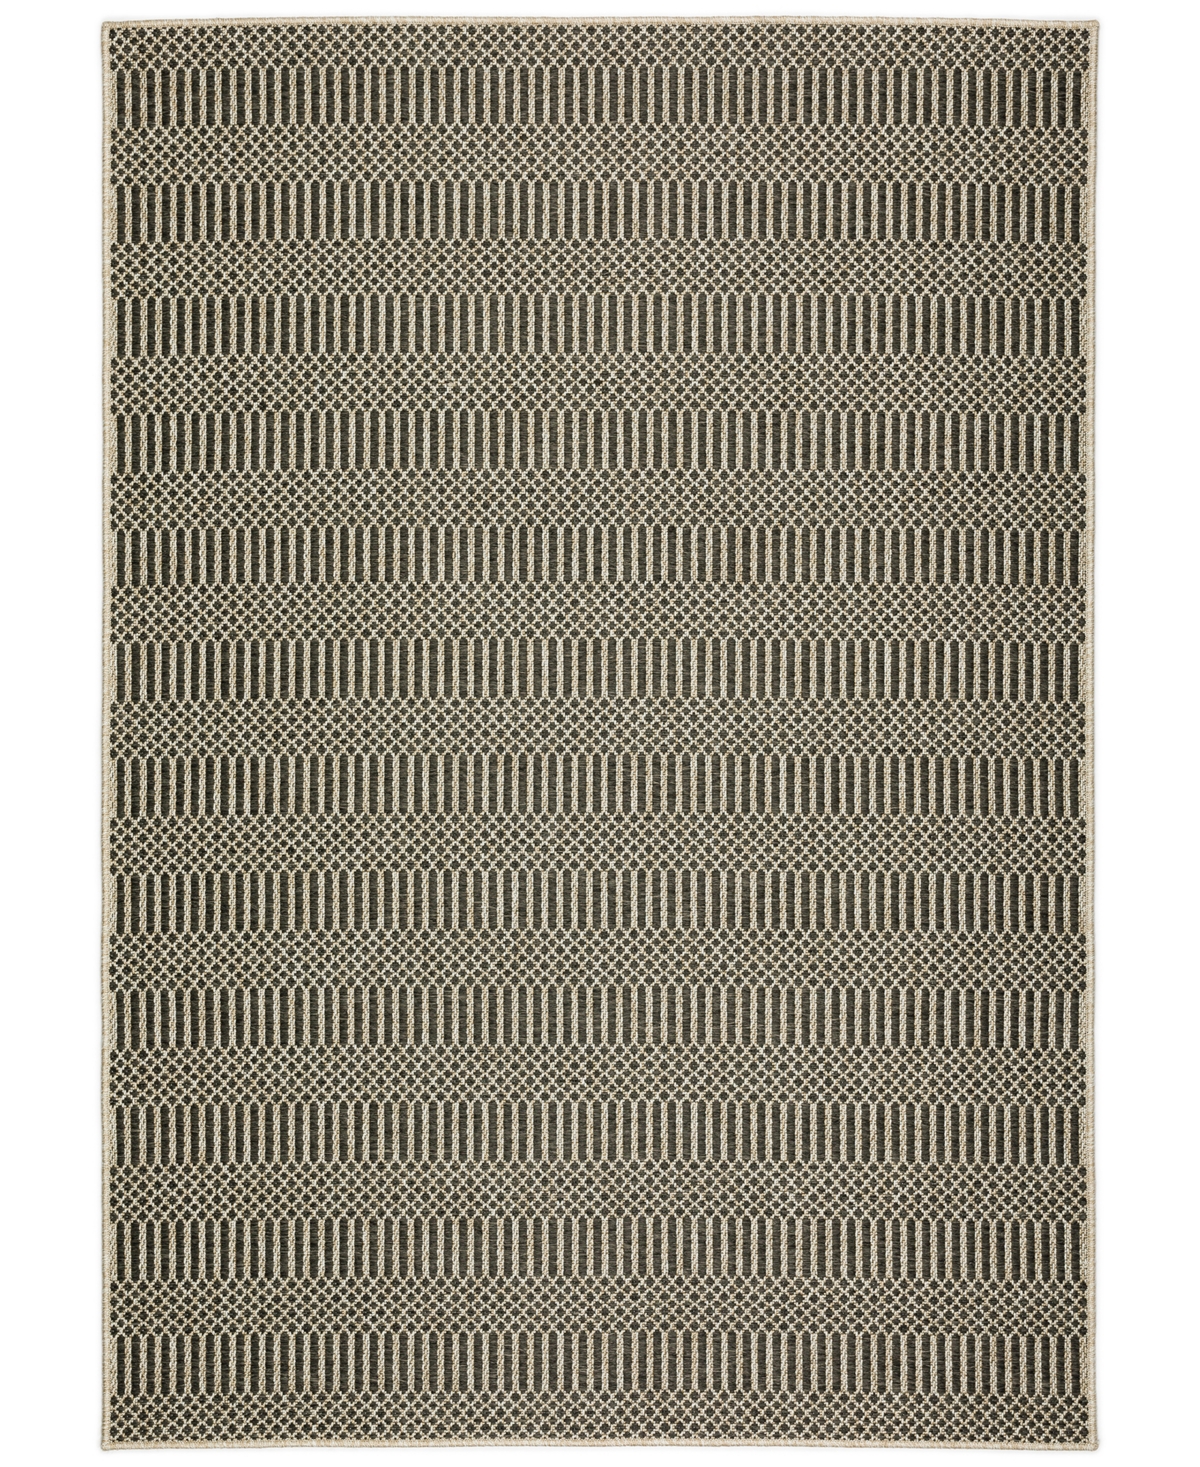 D Style Nusa Outdoor Nsa4 8' X 10' Area Rug In Charcoal